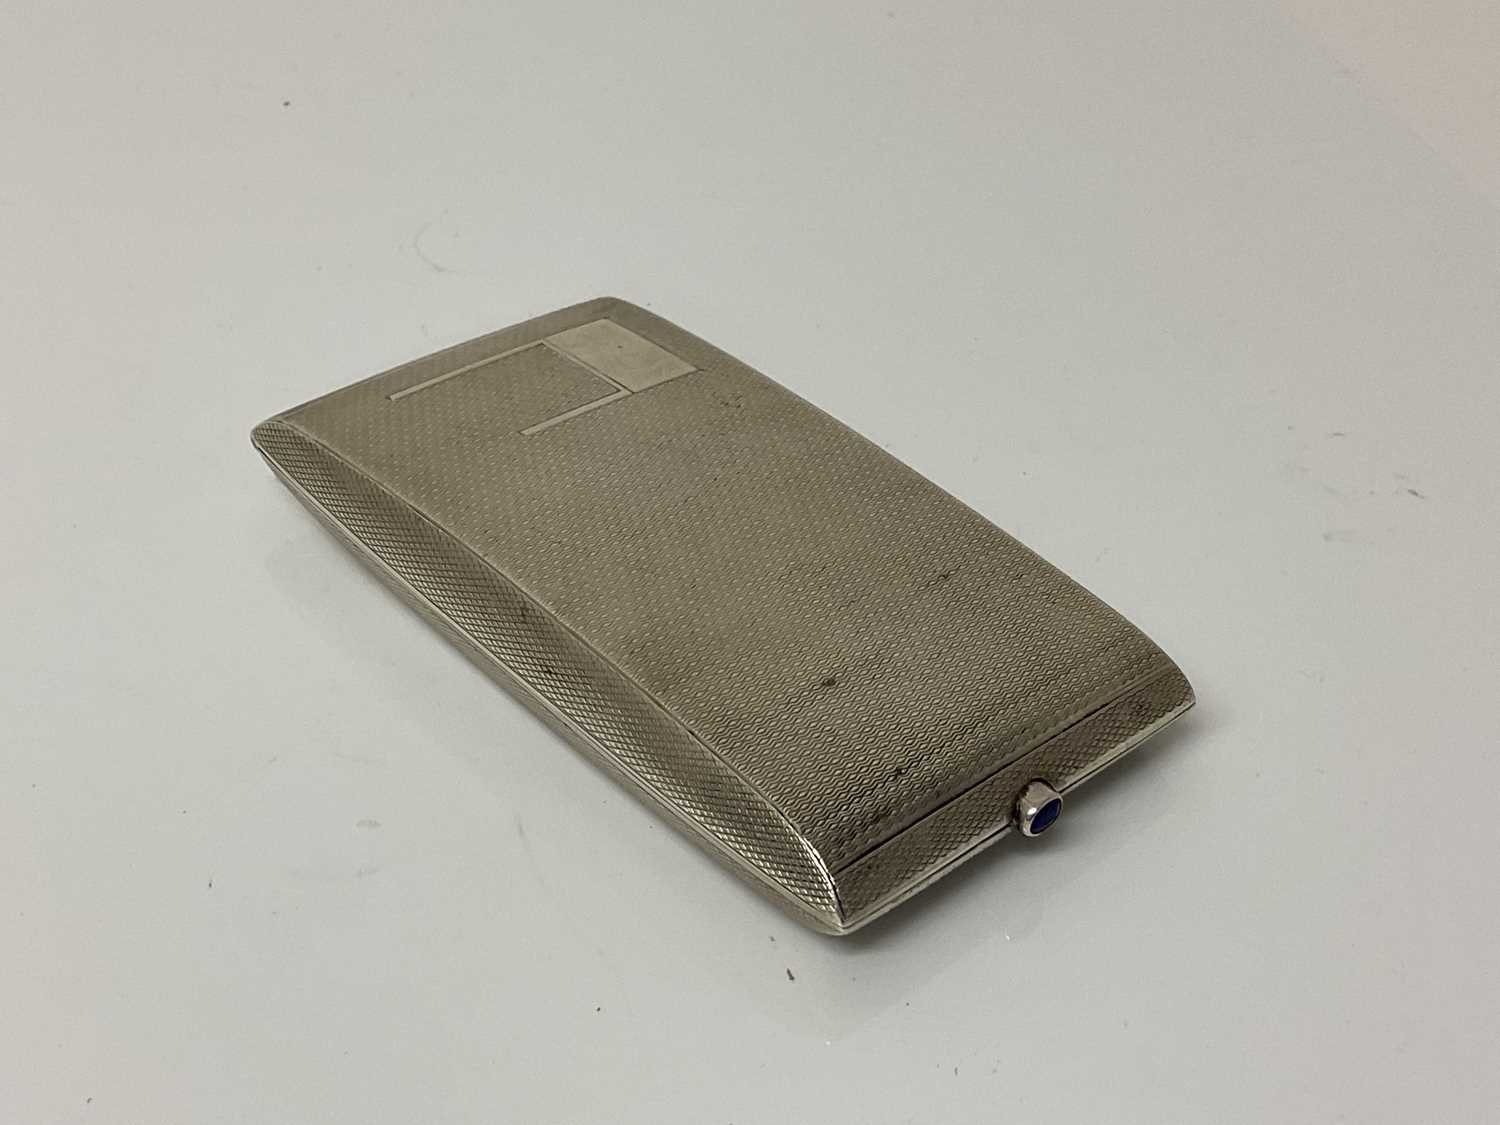 Lot 21 - George V silver cigarette case of rectangular form with engine turned decoration, gem set button and gilded interior, (Birmingham 1933), maker W T Toghill & Co, 9.3cm in overall length, all at 2.1o...